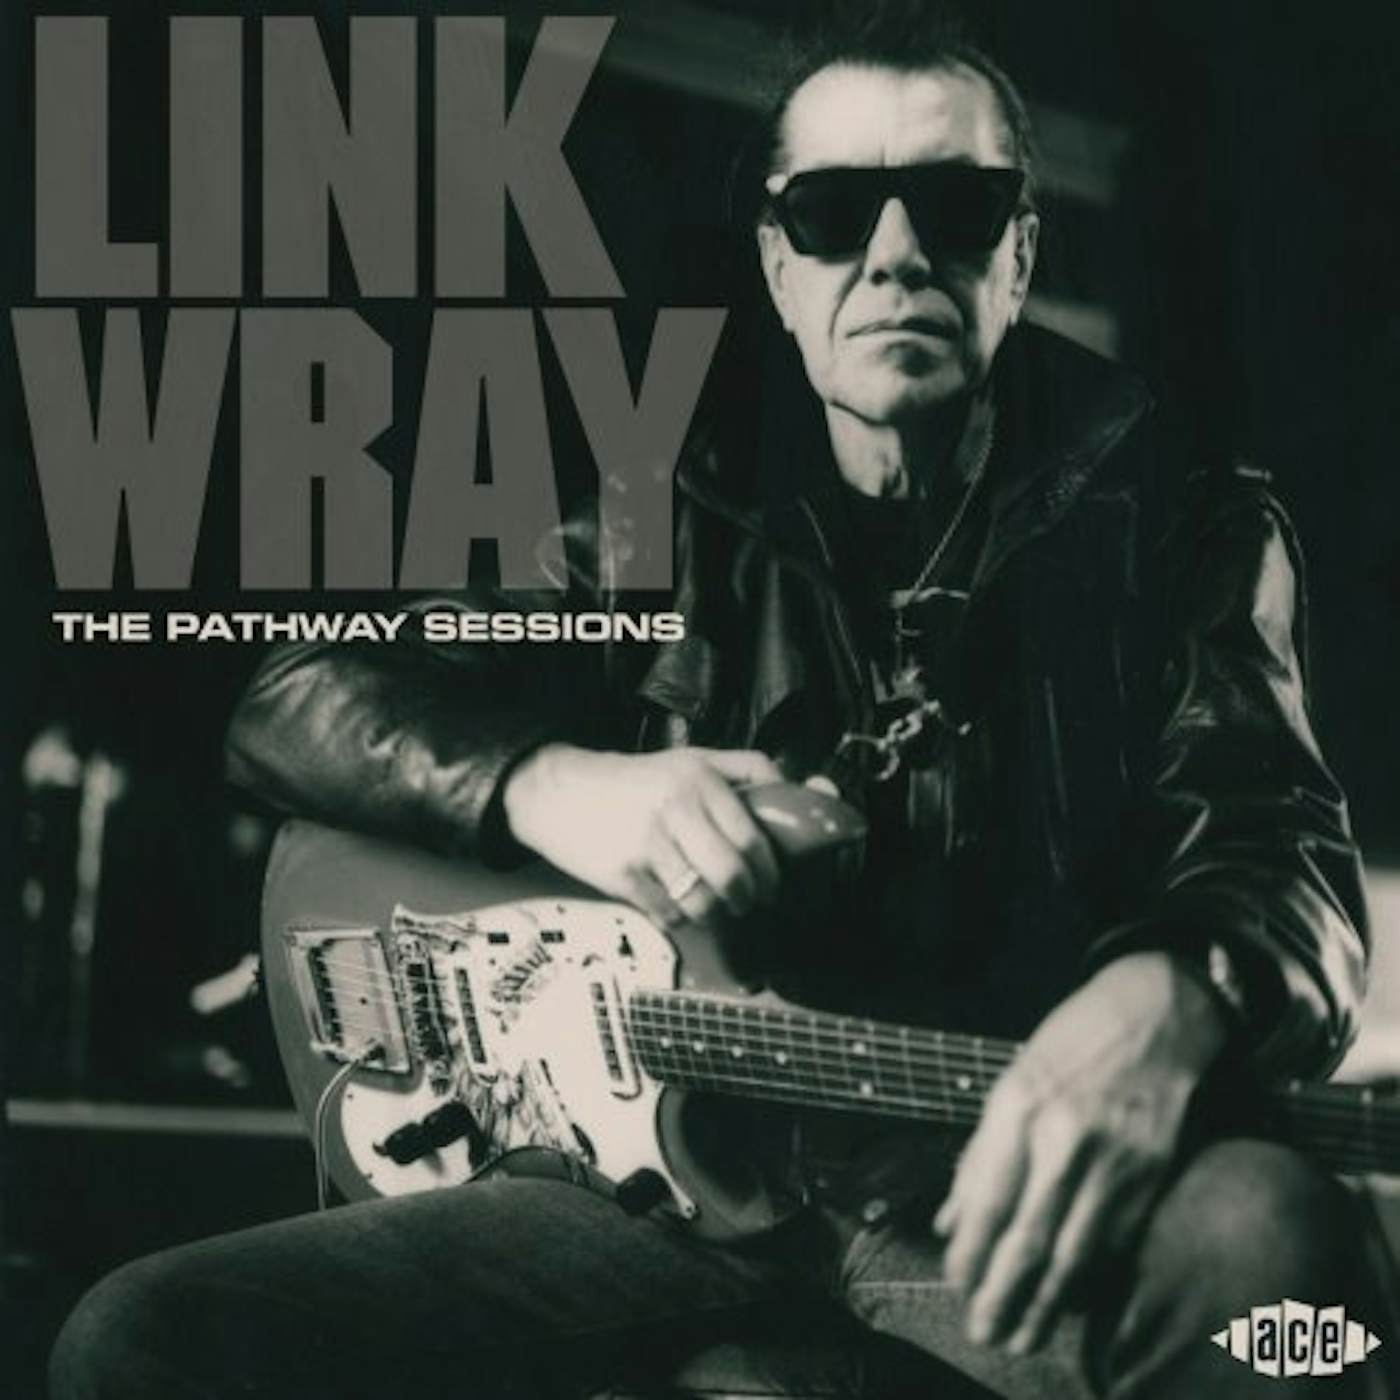 Link Wray PATHWAY SESSIONS CD